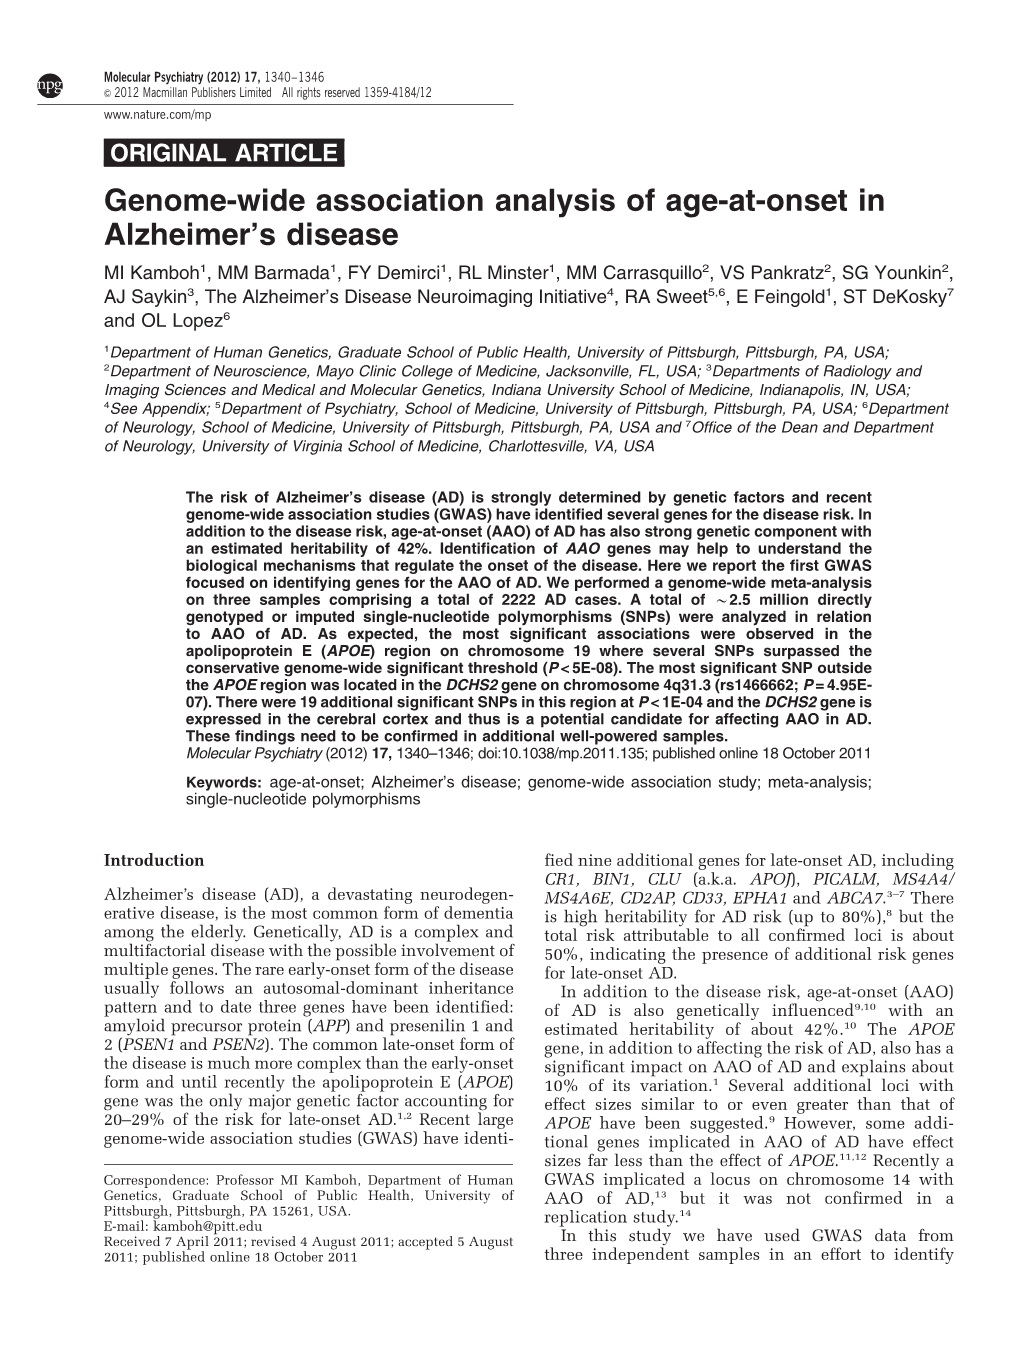 Genome-Wide Association Analysis of Age-At-Onset In